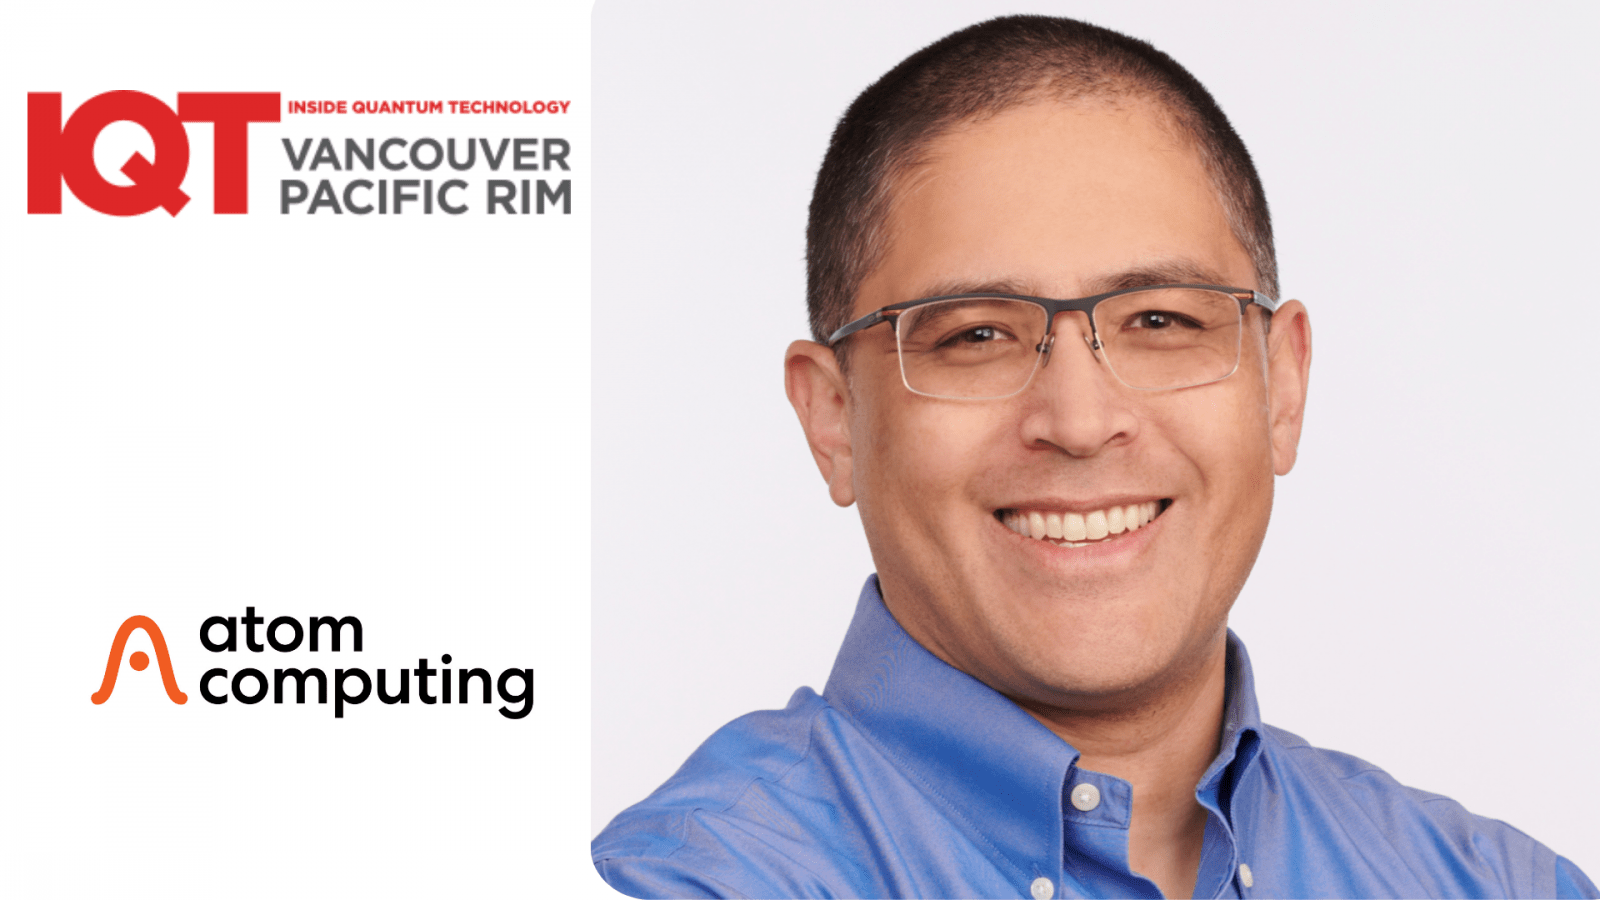 Justin Ging, Chief Product Officer of Atom Computing, as a 2024 Speaker at IQT Vancouver/Pacific Rim